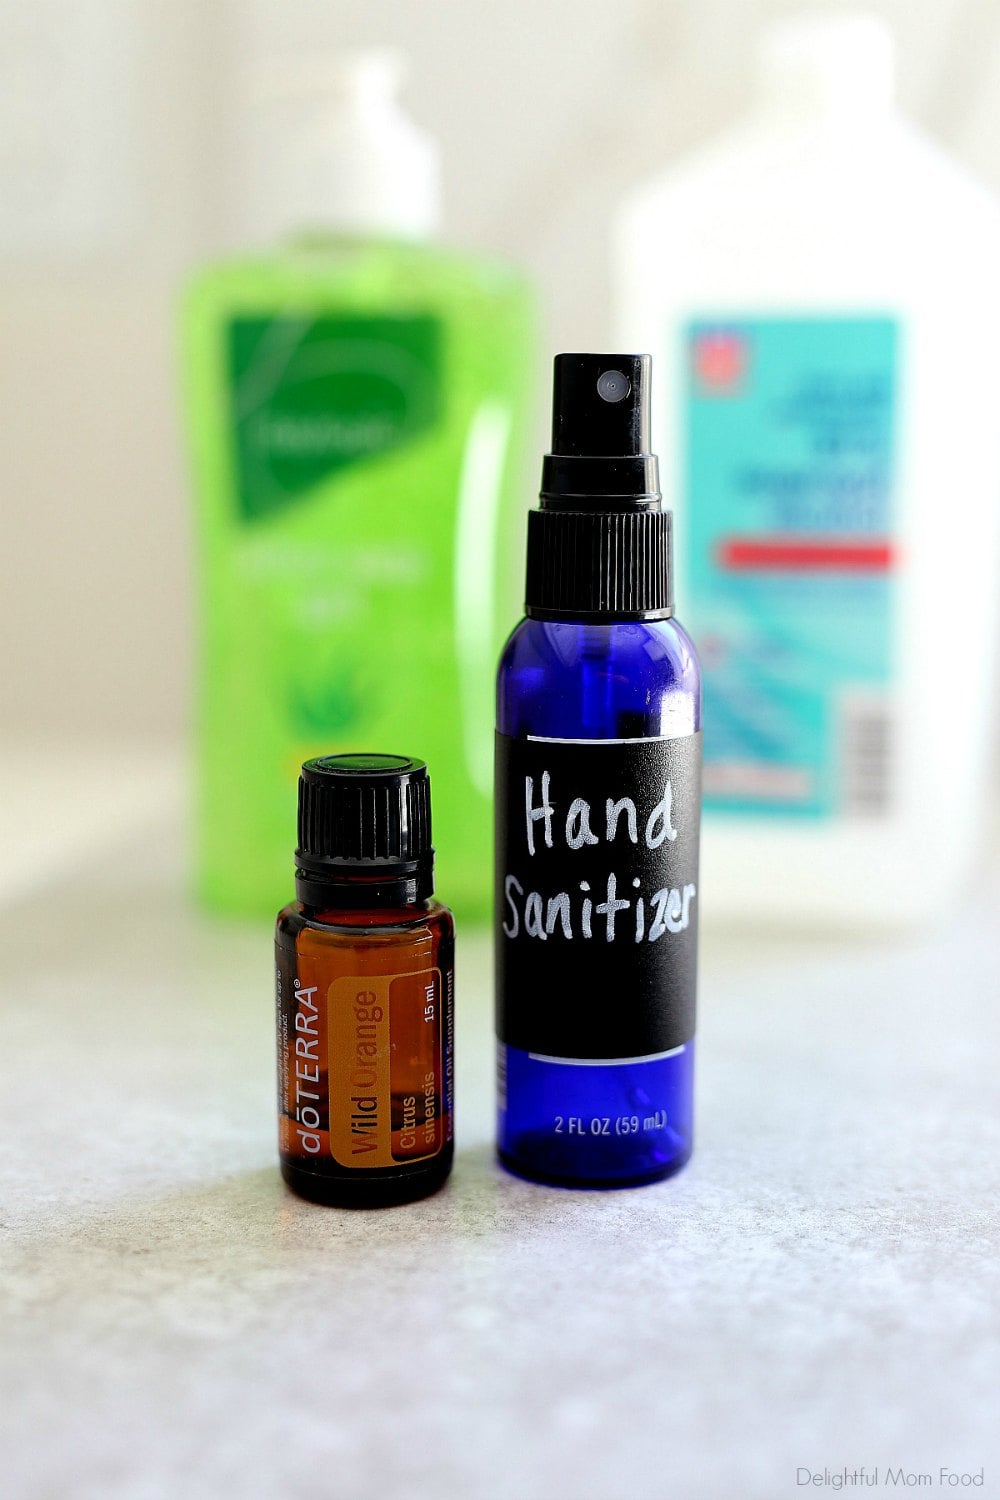 Easily make hand sanitizer at home with 3 simple ingredients! This homemade hand sanitizer recipe uses alcohol, aloe, and essential oils with the perfect ratio to sanitize without extra chemicals and fussy ingredients. Perfect when need some in a jiffy! #diy #homemade #recipe #handsanitzer #howtomake #recipeforhandsanitizer #handsanitizerspray | Recipe at Delightful Mom Food